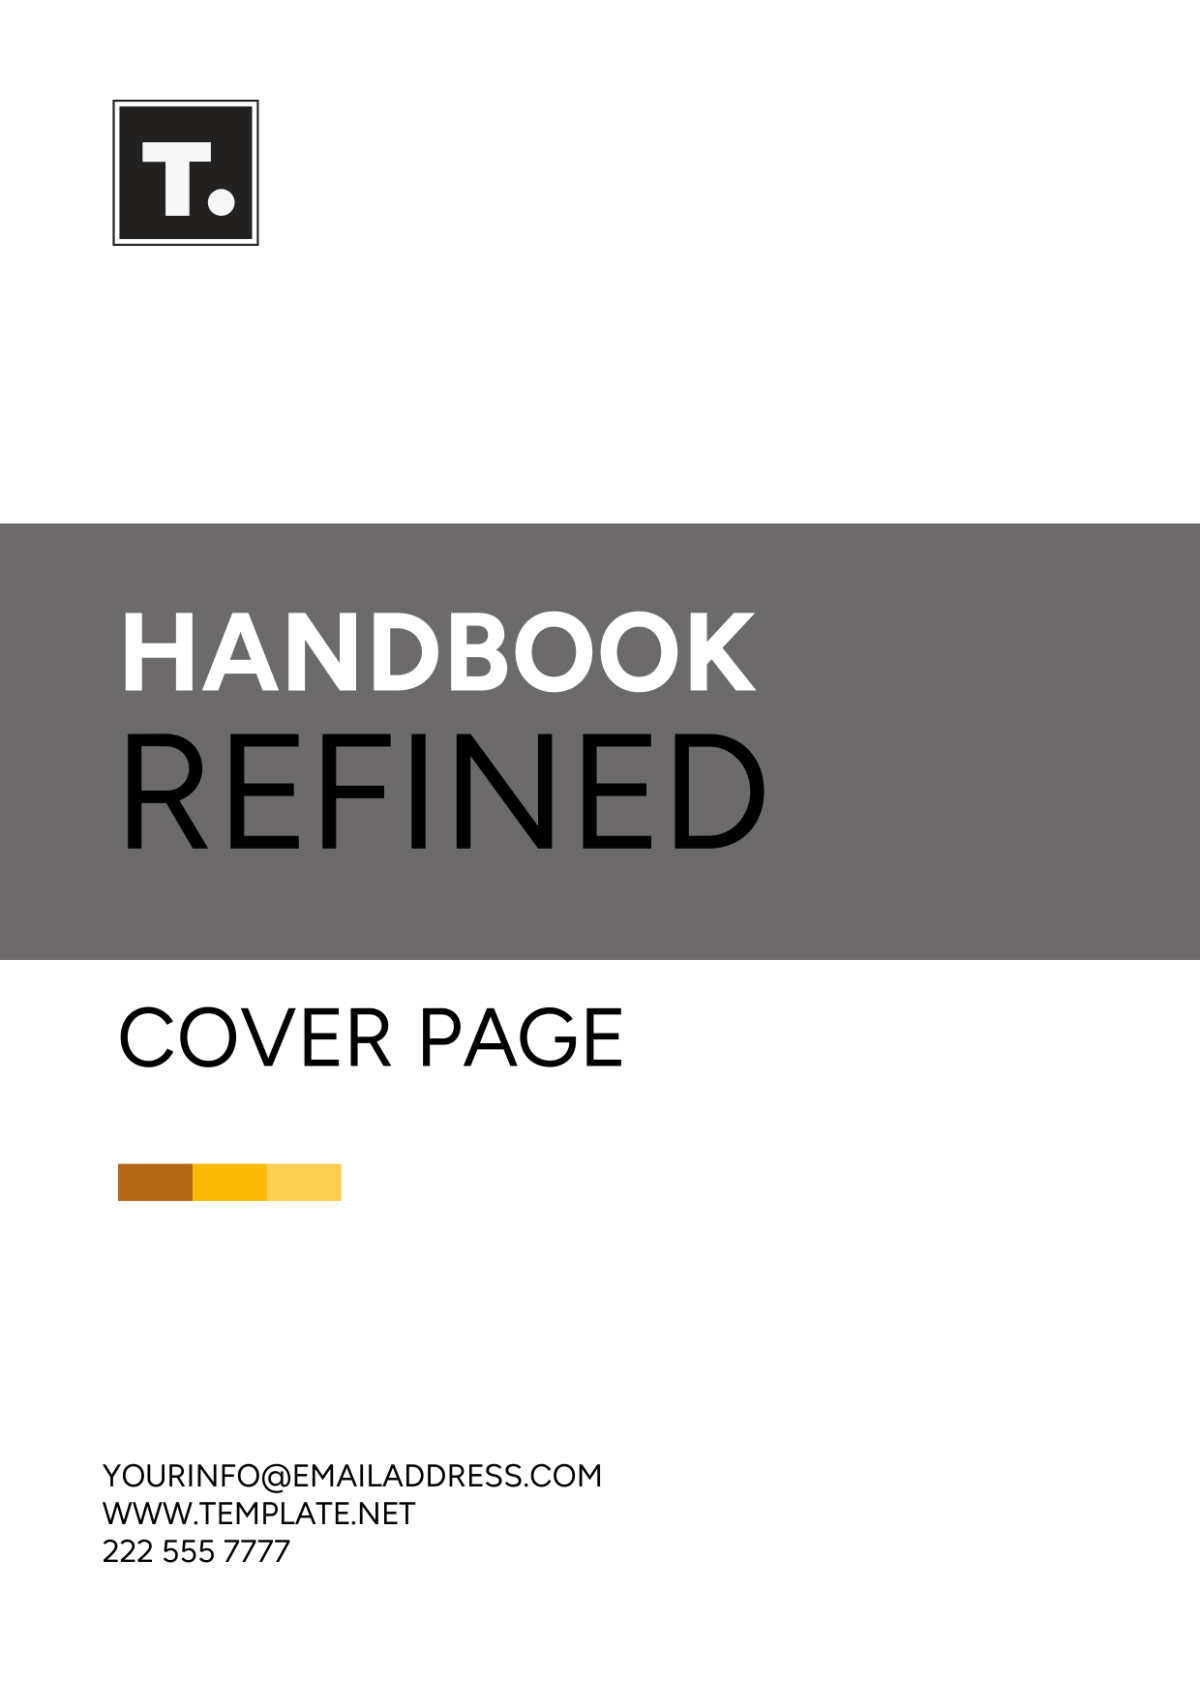 Handbook Refined Cover Page Template